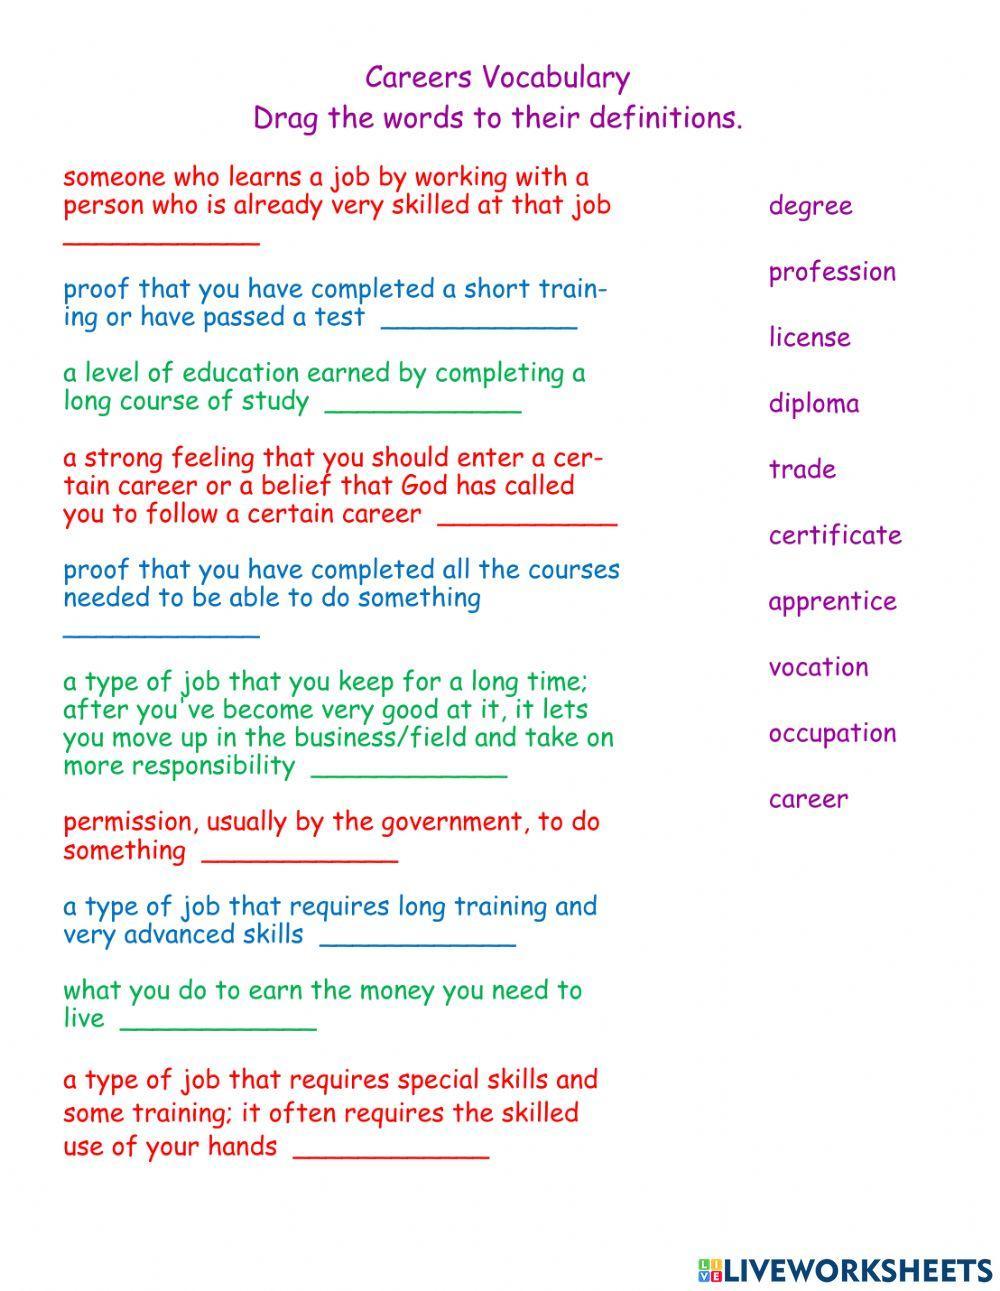 Careers Vocabulary Drag and Drop